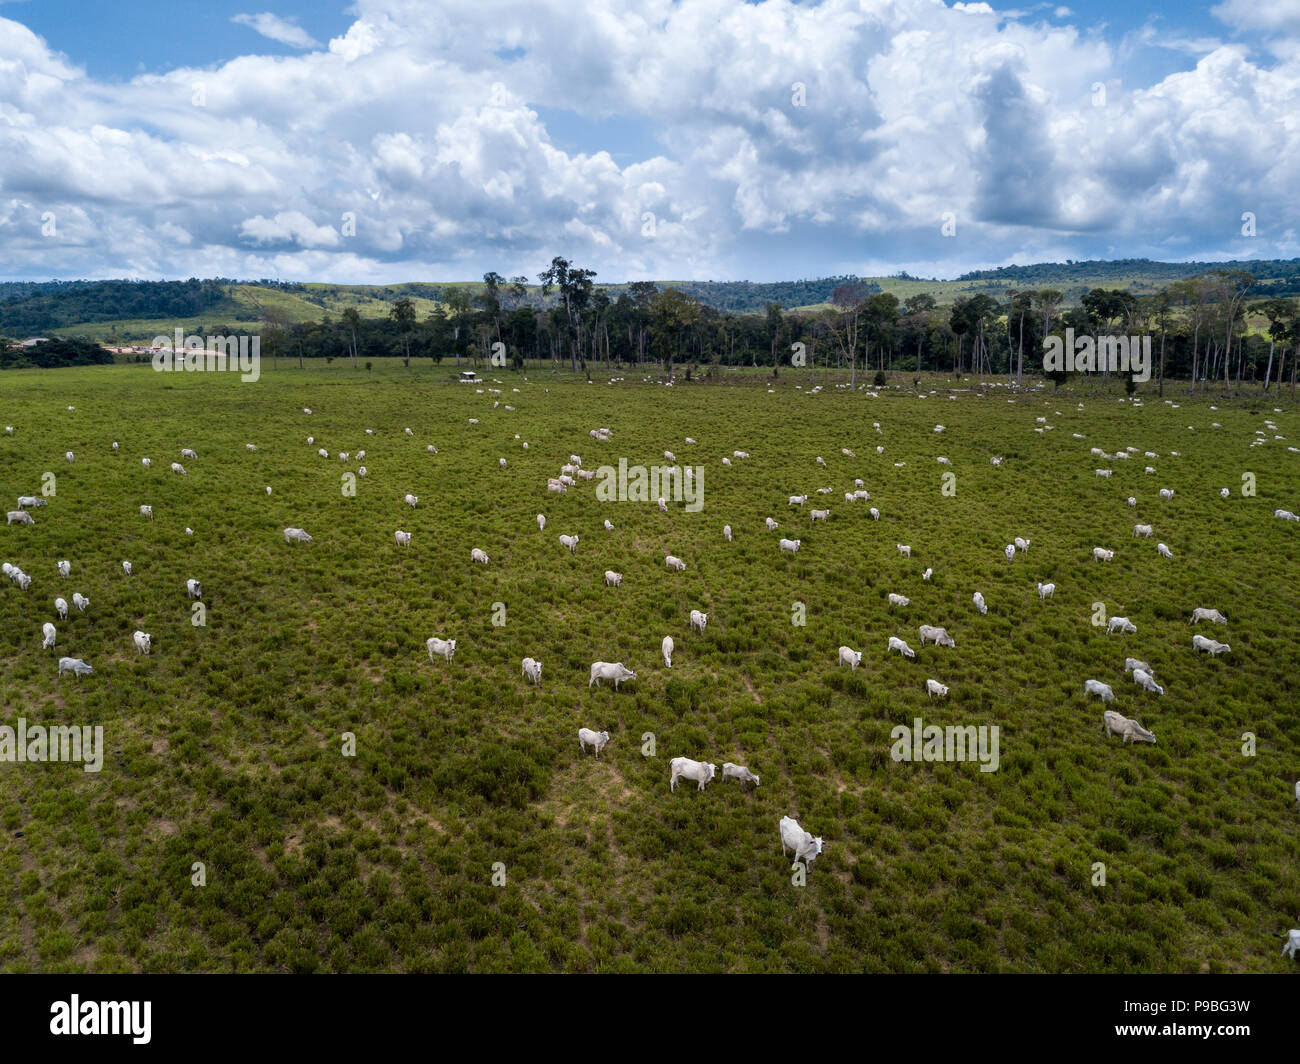 Pará, Brazil. Aerial view of cattle grazing in deforested green area of Amazon on a sunny summer day. Stock Photo